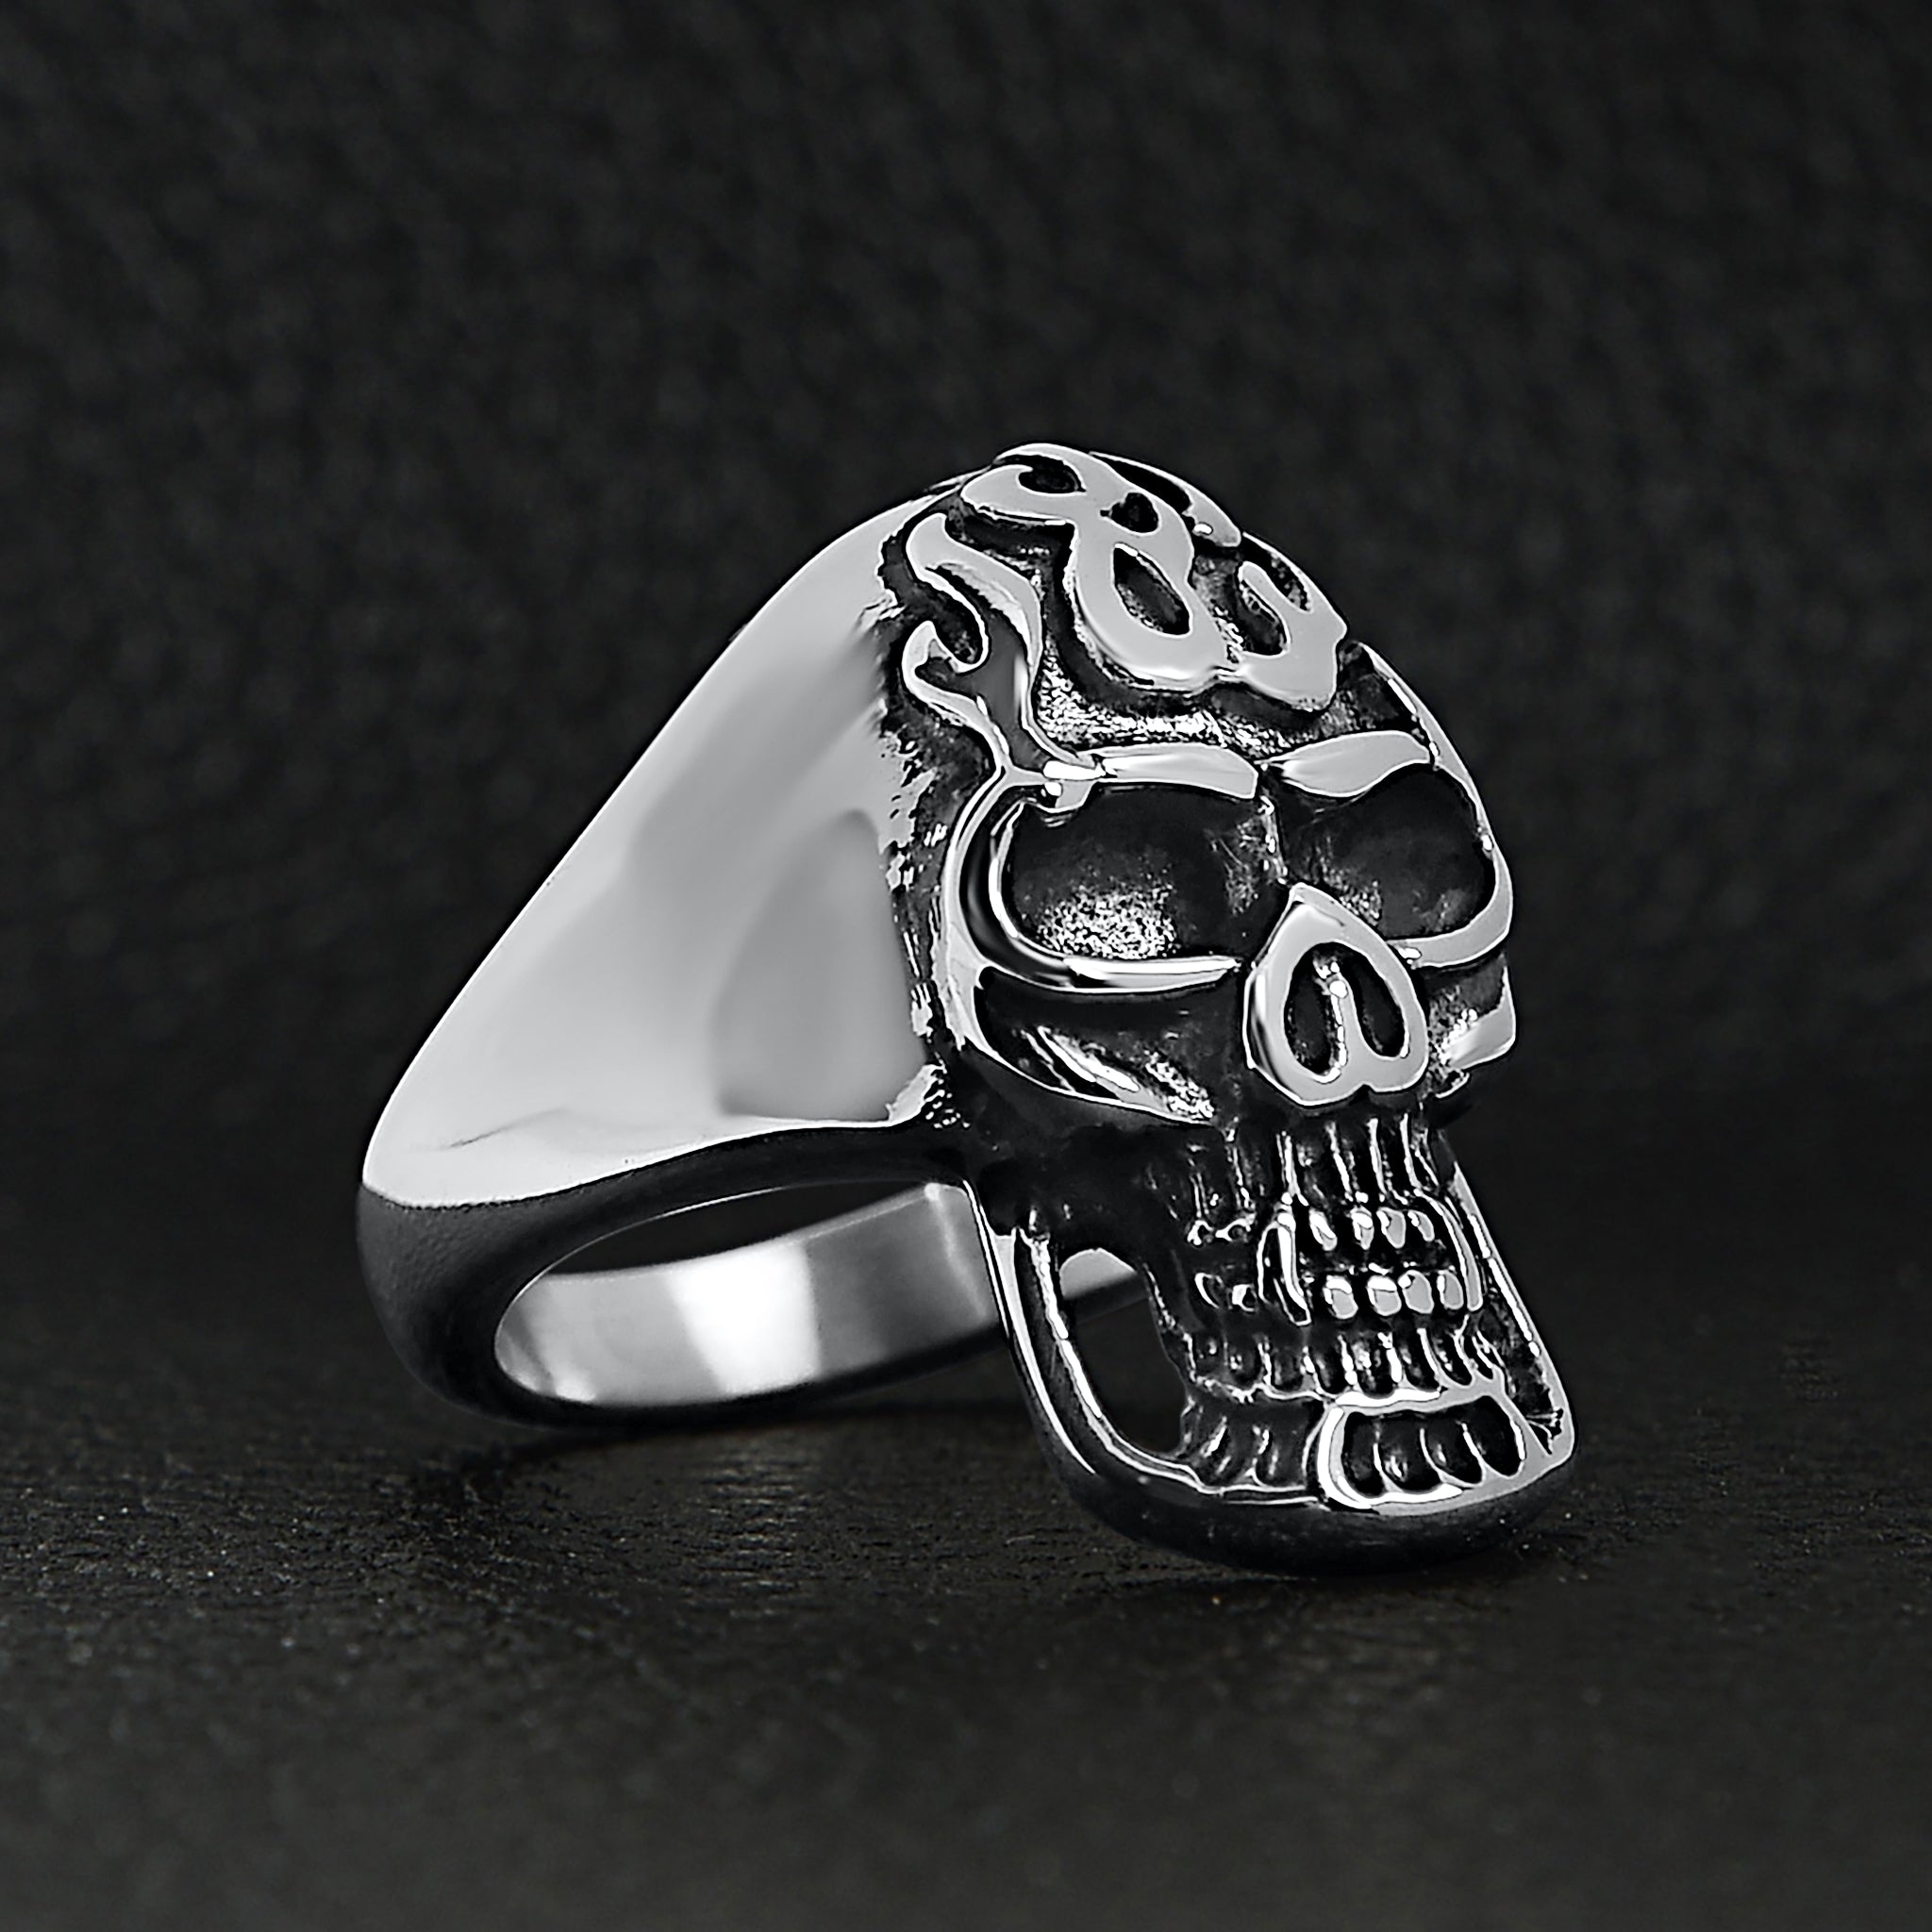 Stainless Steel Flaming Skull Ring - Polished Band for Men's Biker/Goth Style - Jewelry & Watches - Bijou Her -  -  - 